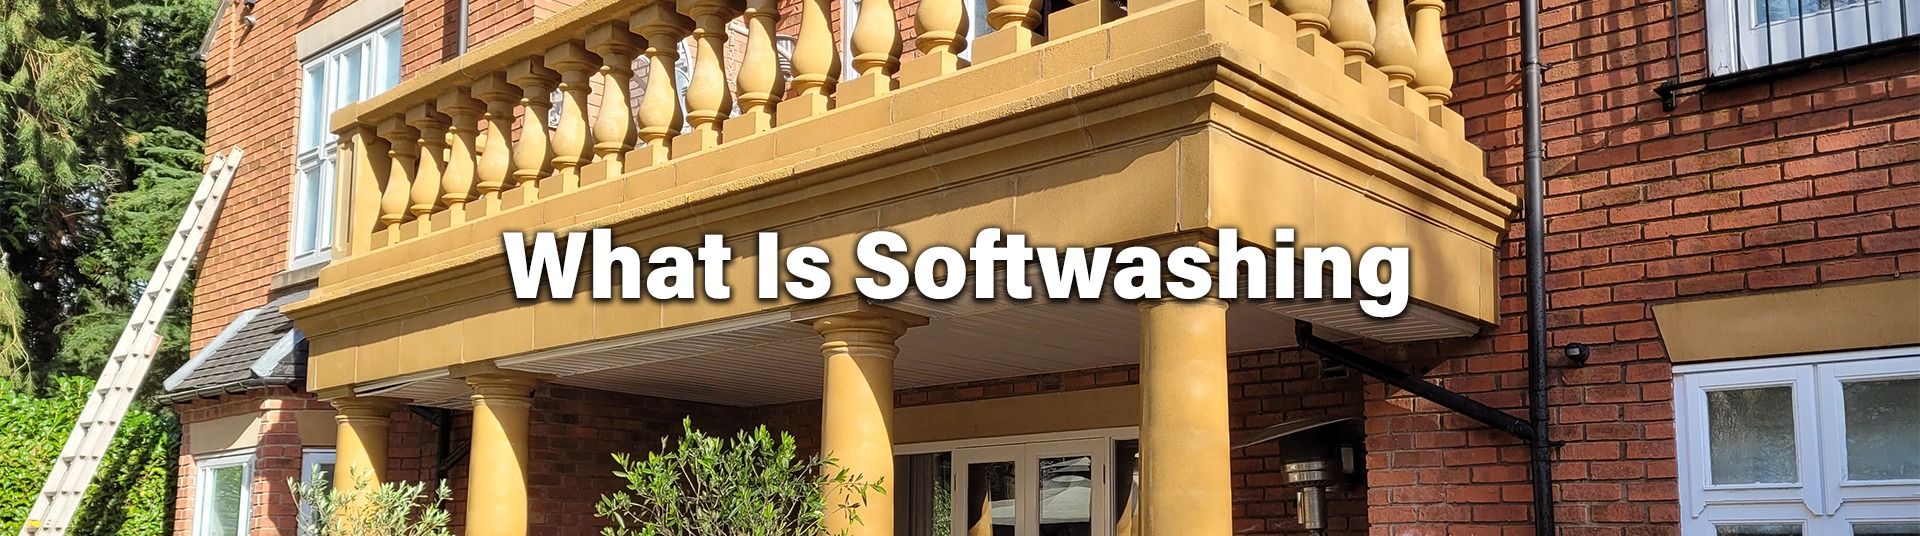 What Is Softwashing 